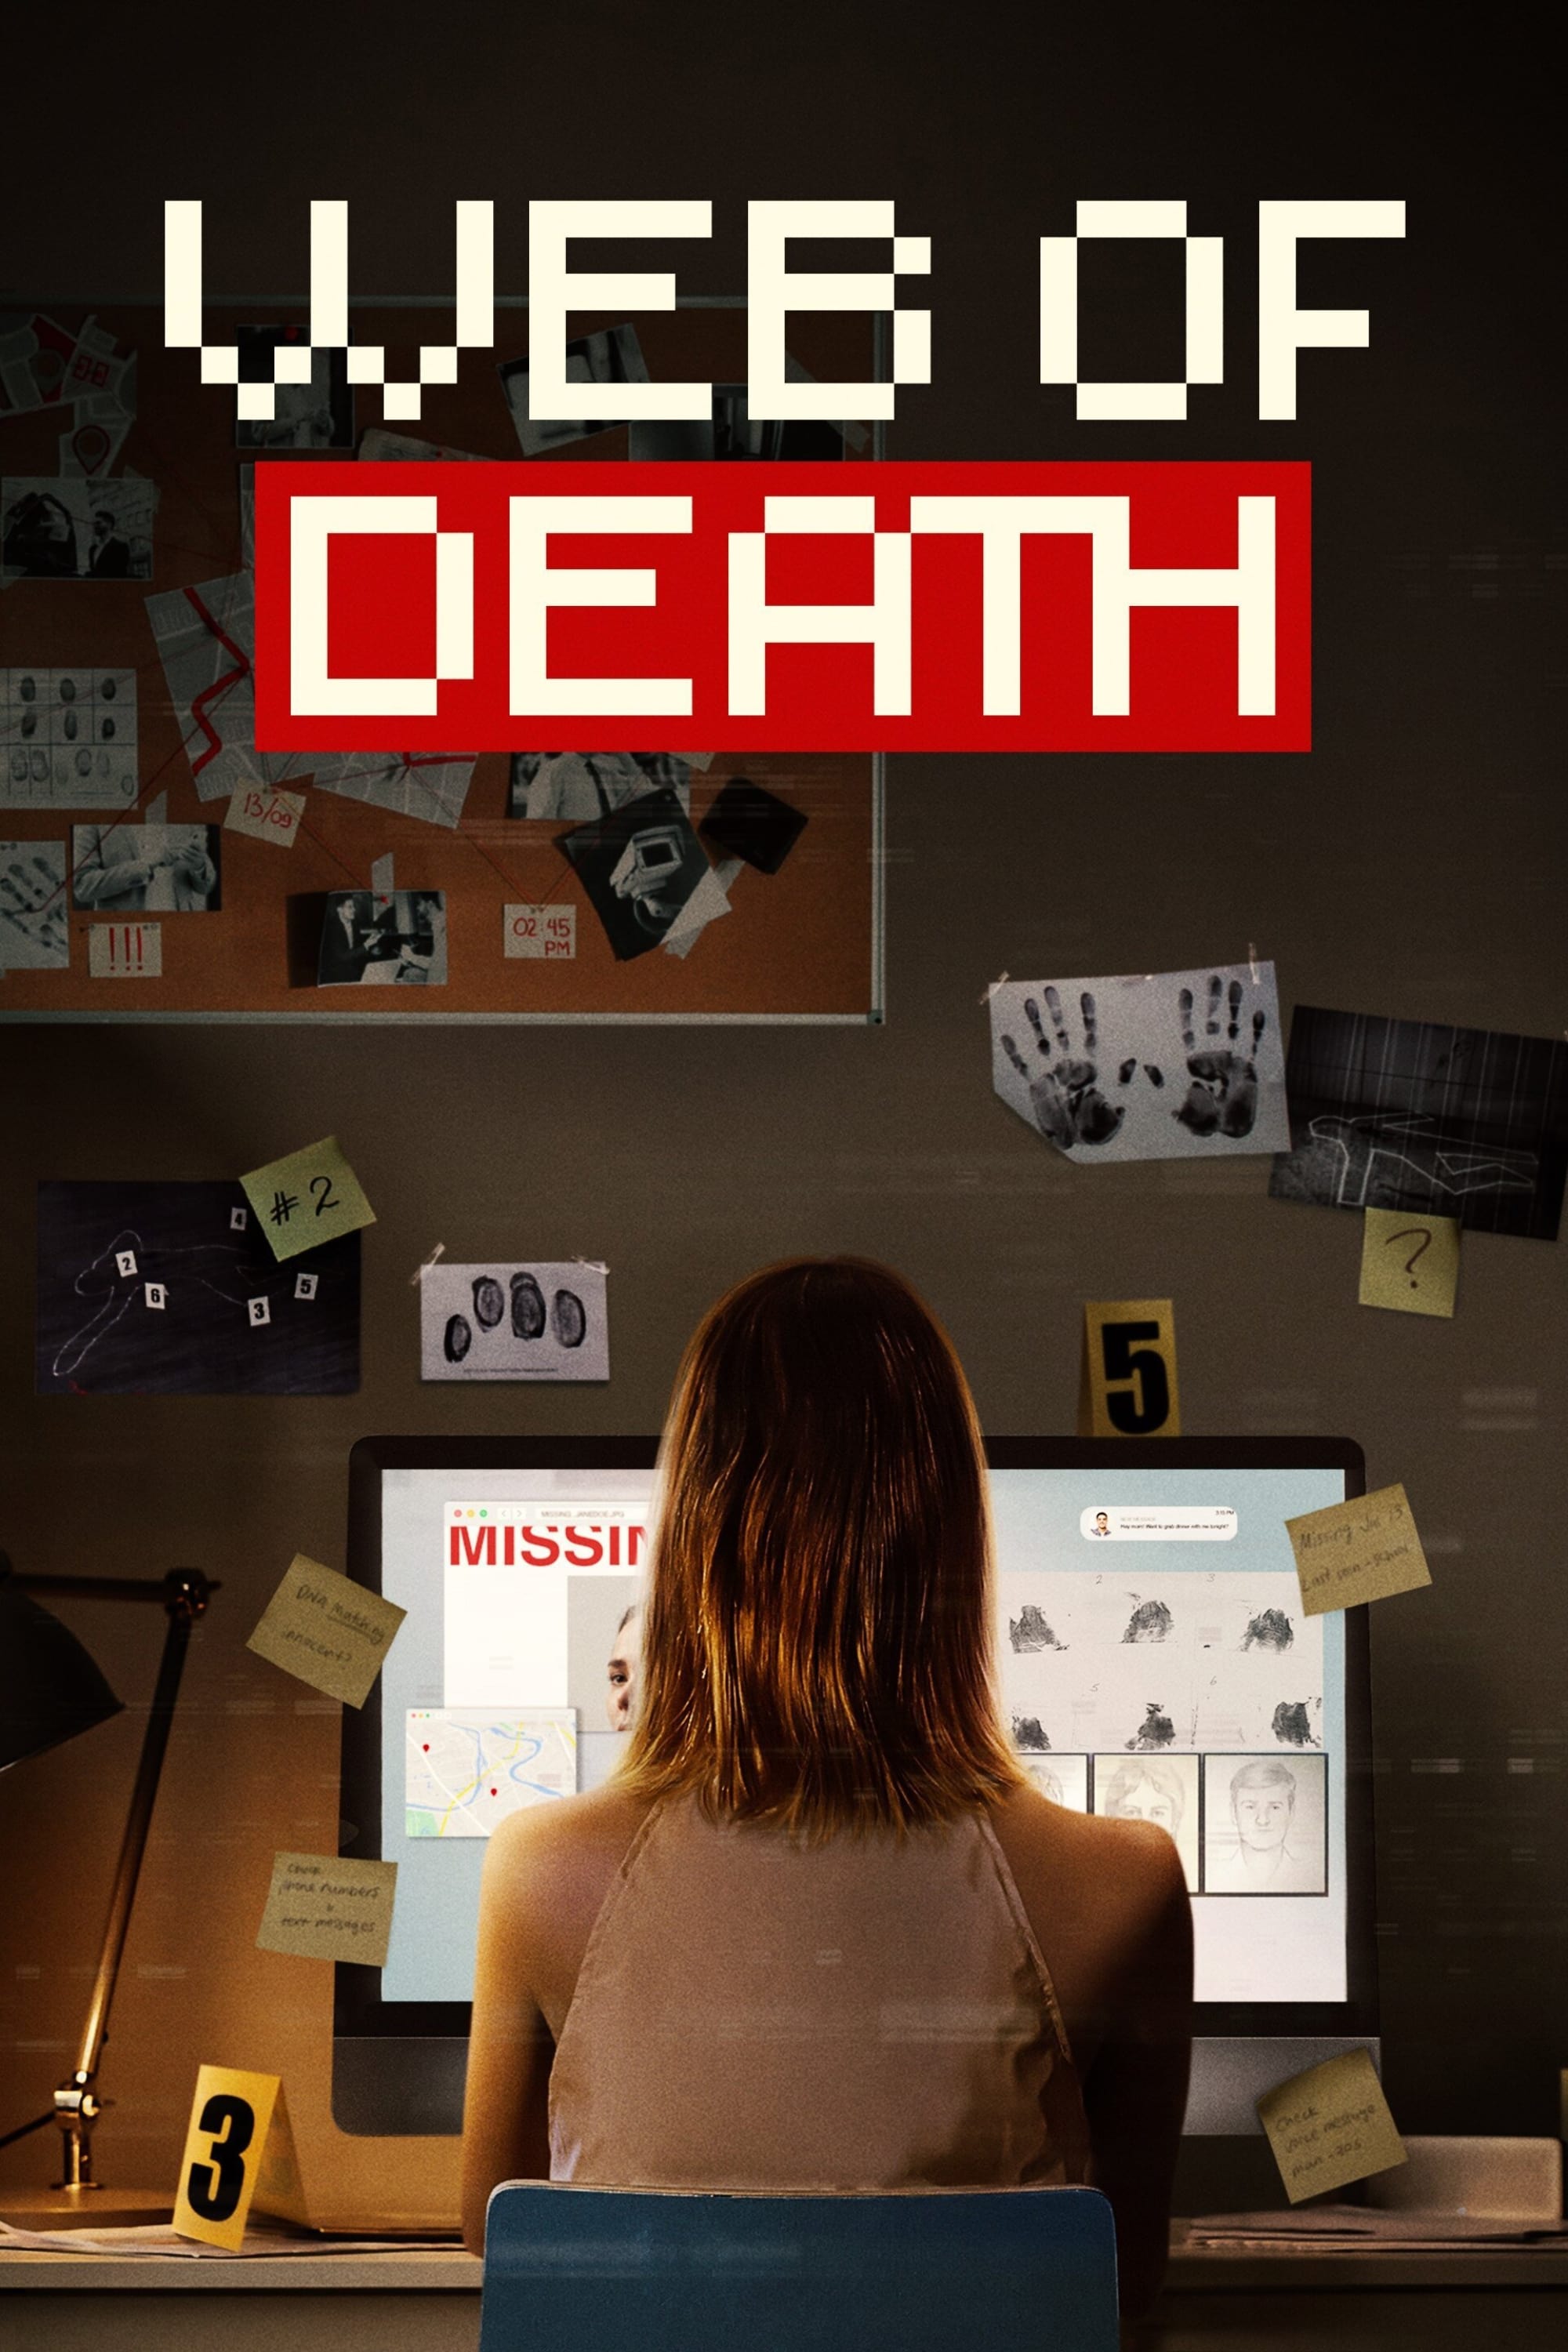 Web of Death - Série TV 2023 streaming VF gratuit complet